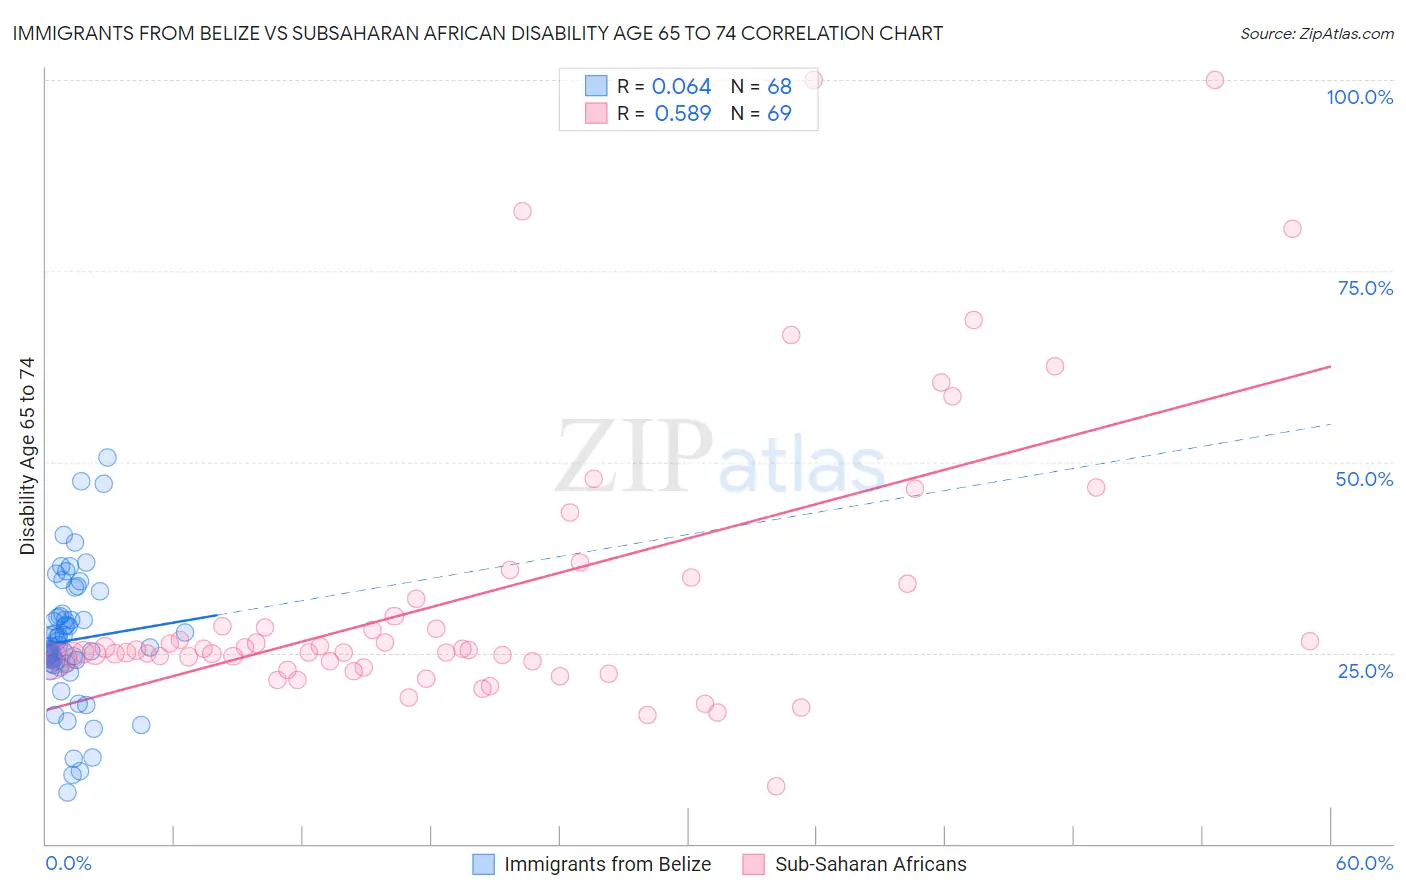 Immigrants from Belize vs Subsaharan African Disability Age 65 to 74